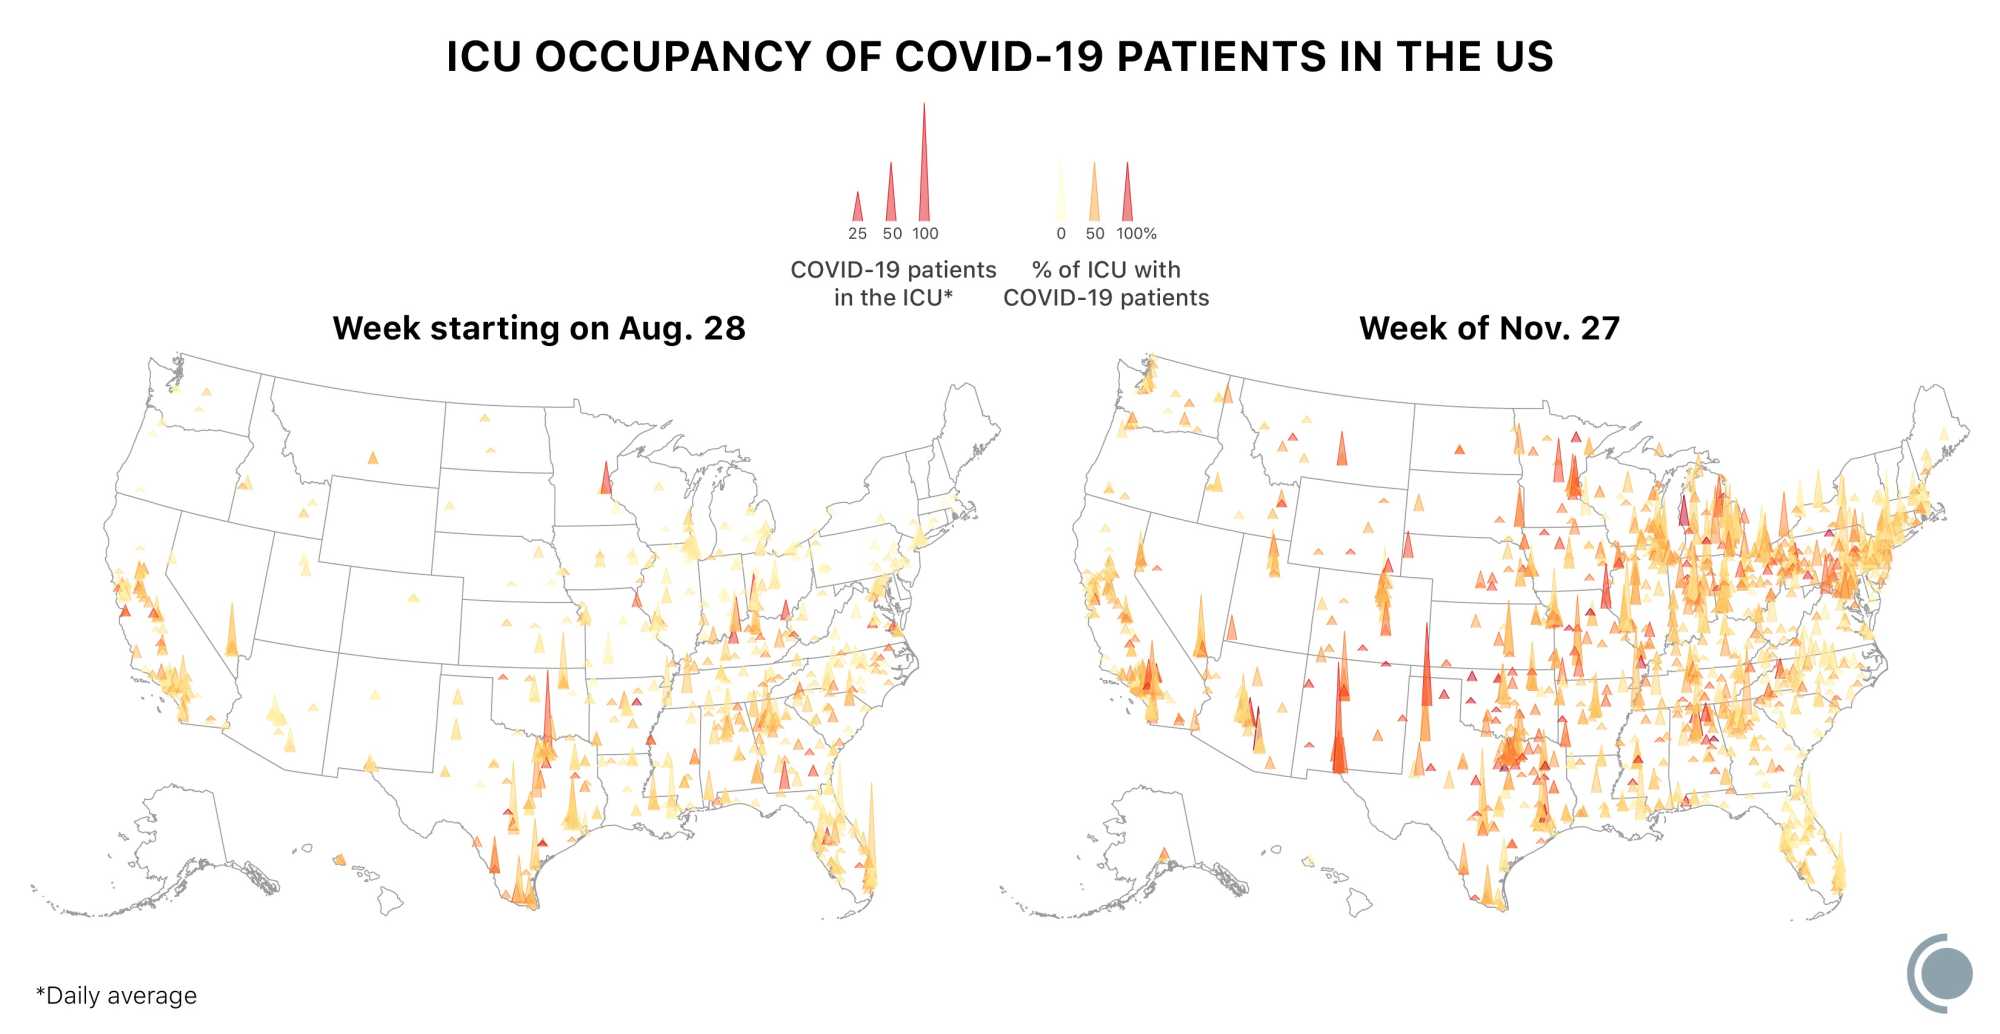 2 maps of the US showing the number of patients with COVID-19 in ICUs at hospitals across the country. In the first map (week of Aug 28) there were only a few hospitals with very high COVID-19 numbers. In the second map (week of Nov 27), hospitals are peaking across the country.